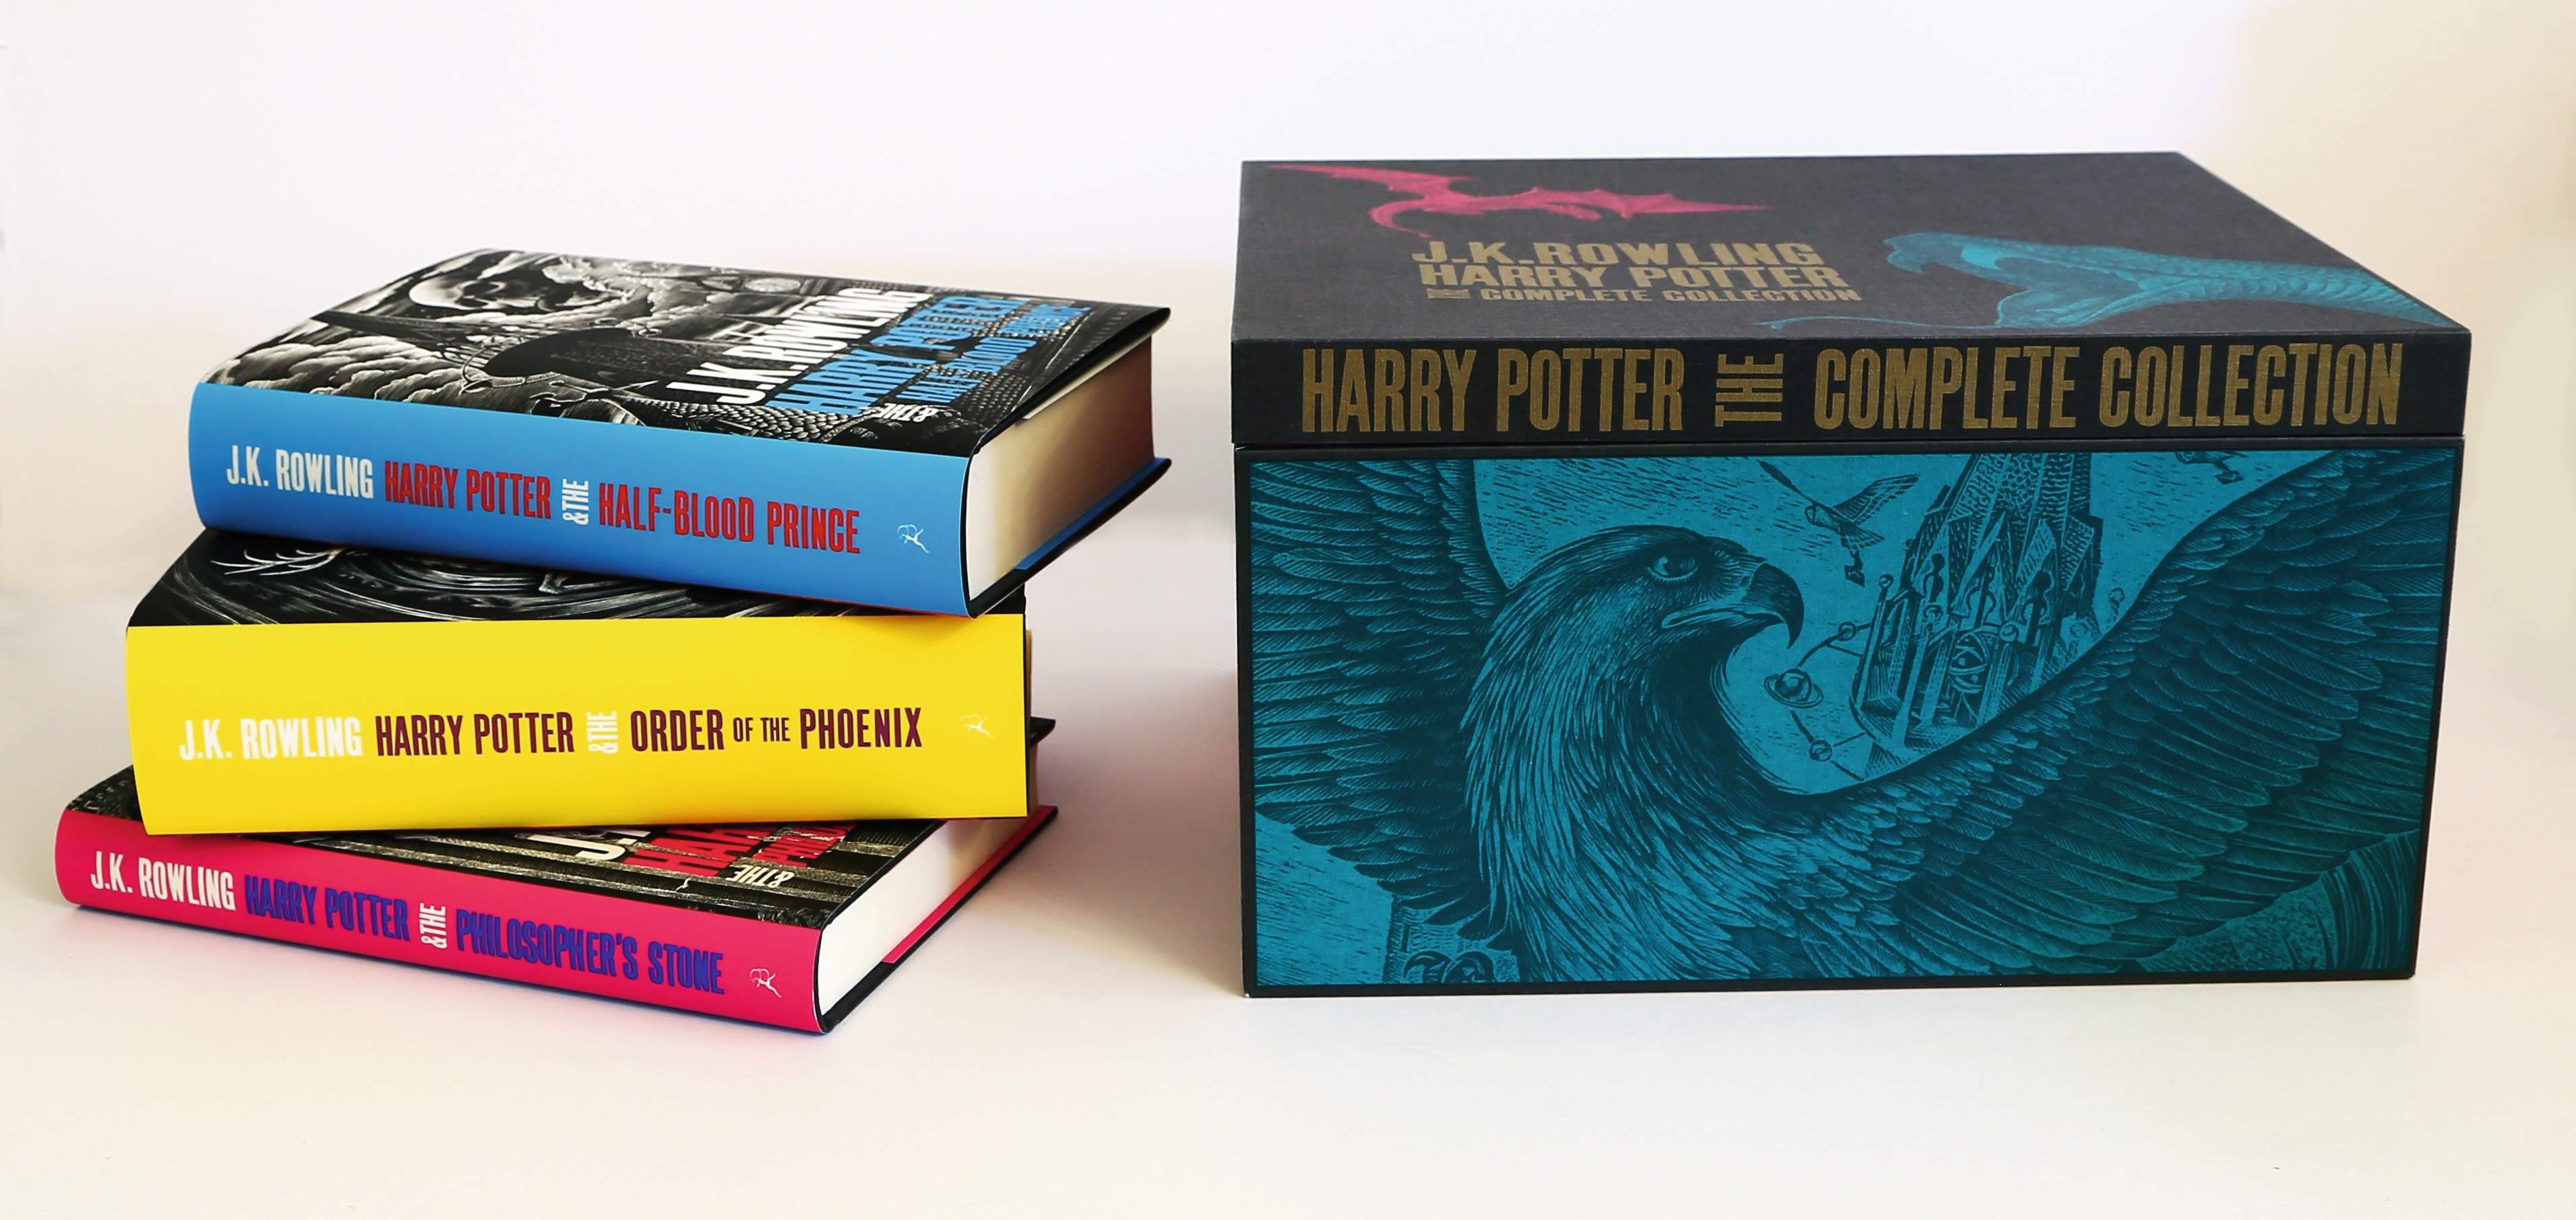 Harry Potter Adult Hardback Box Set / Contains: Philosopher's Stone / Chamber of Secrets / Prisoner of Azkaban / Goblet of Fire / Order of the Phoenix / Half-Blood Prince / Deathly Hollows / Rowling - Rowling, Joanne K.